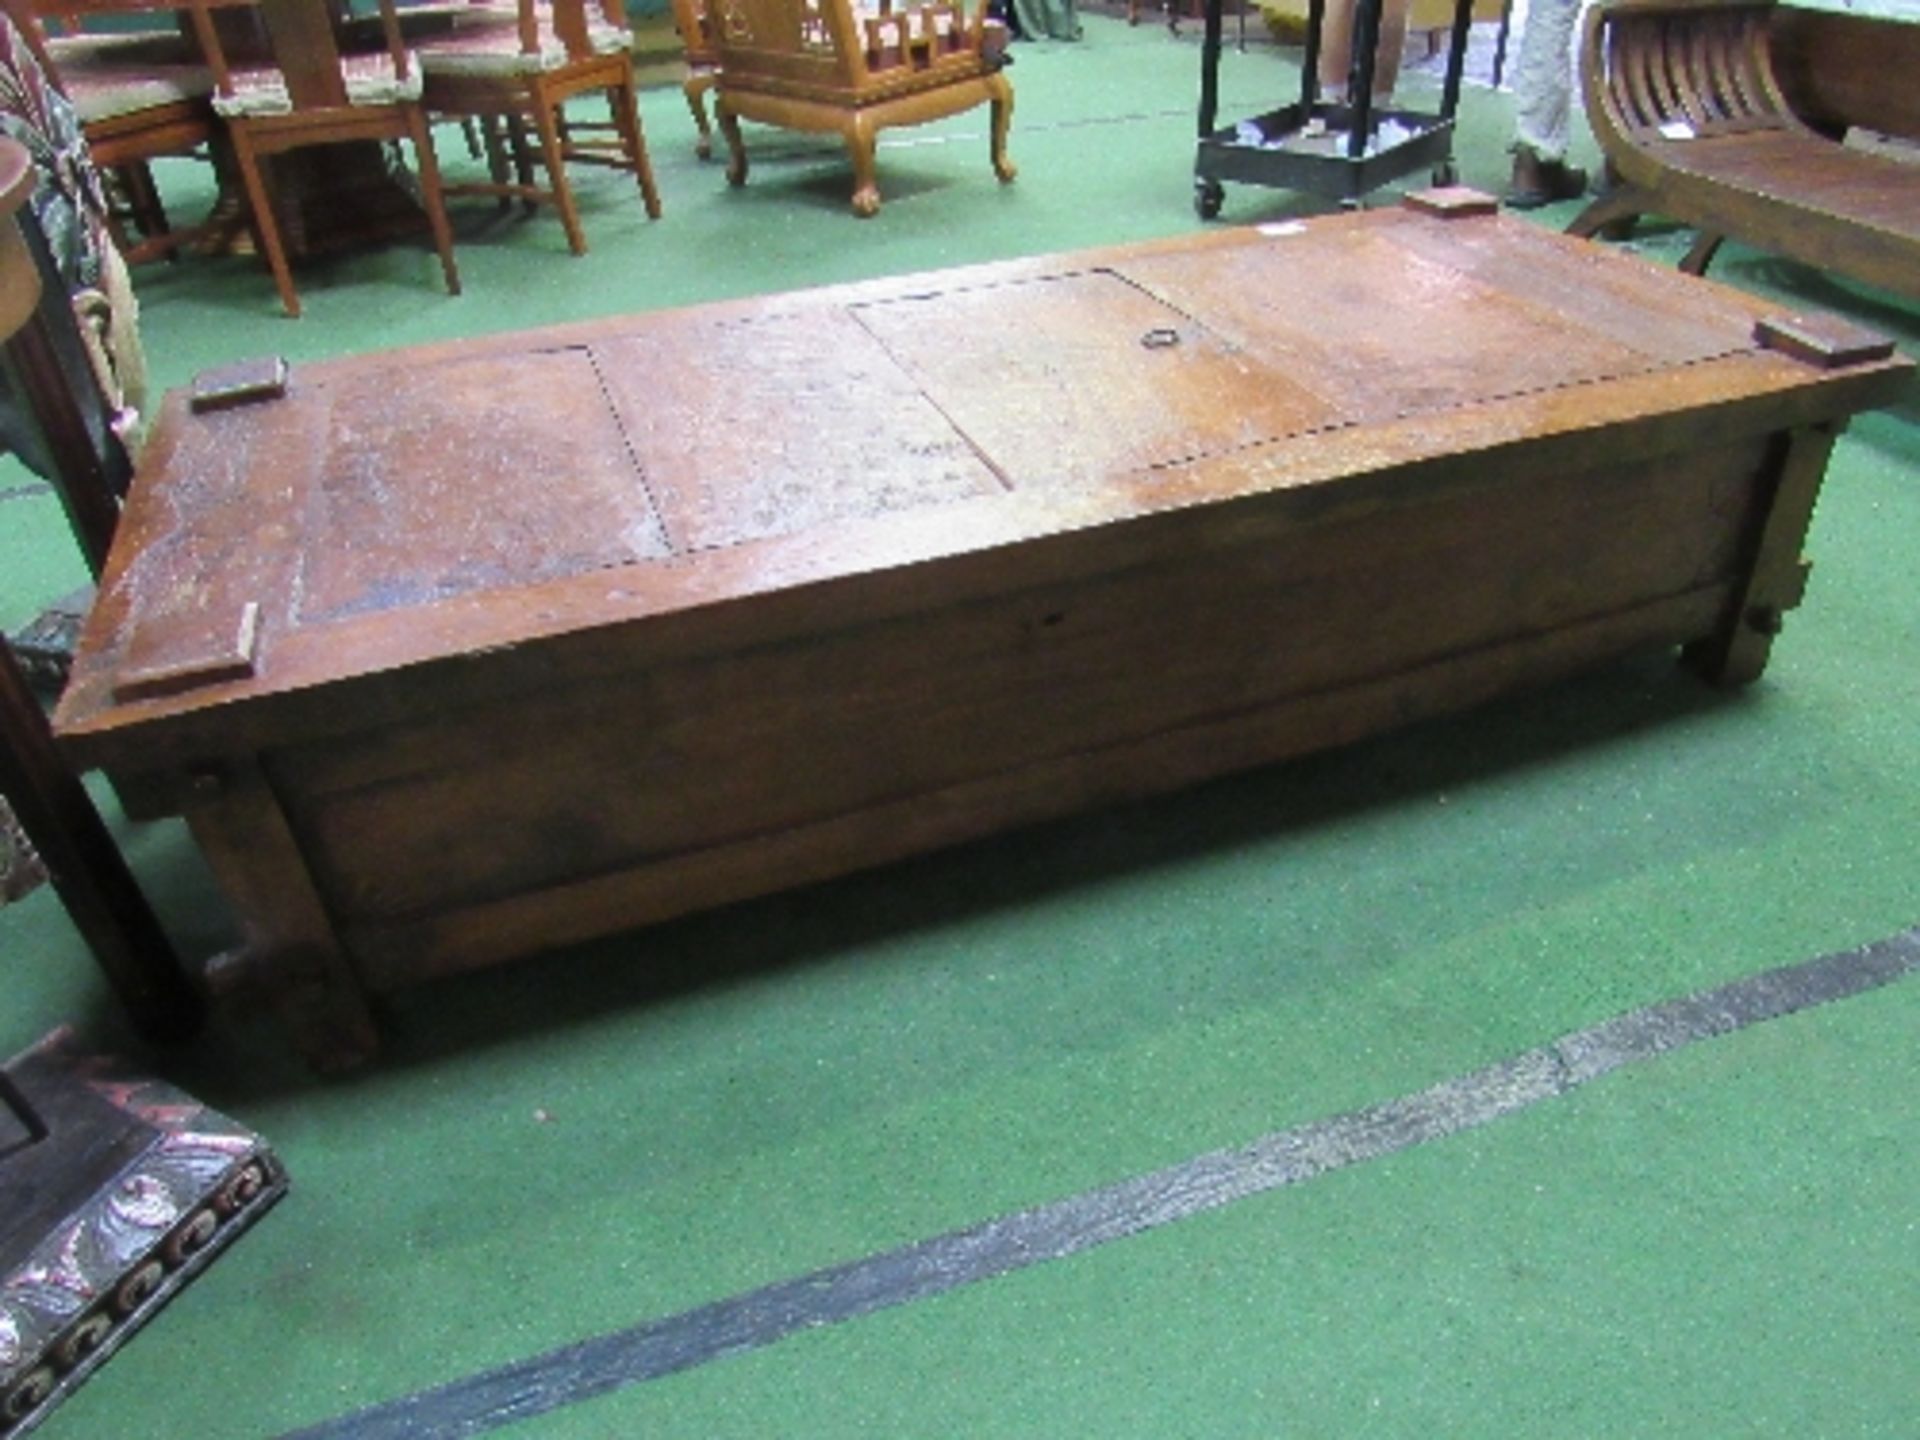 Antique Indonesian rice bed with central hatch door for access to internal storage, 72" x 31" x 17" - Image 4 of 5